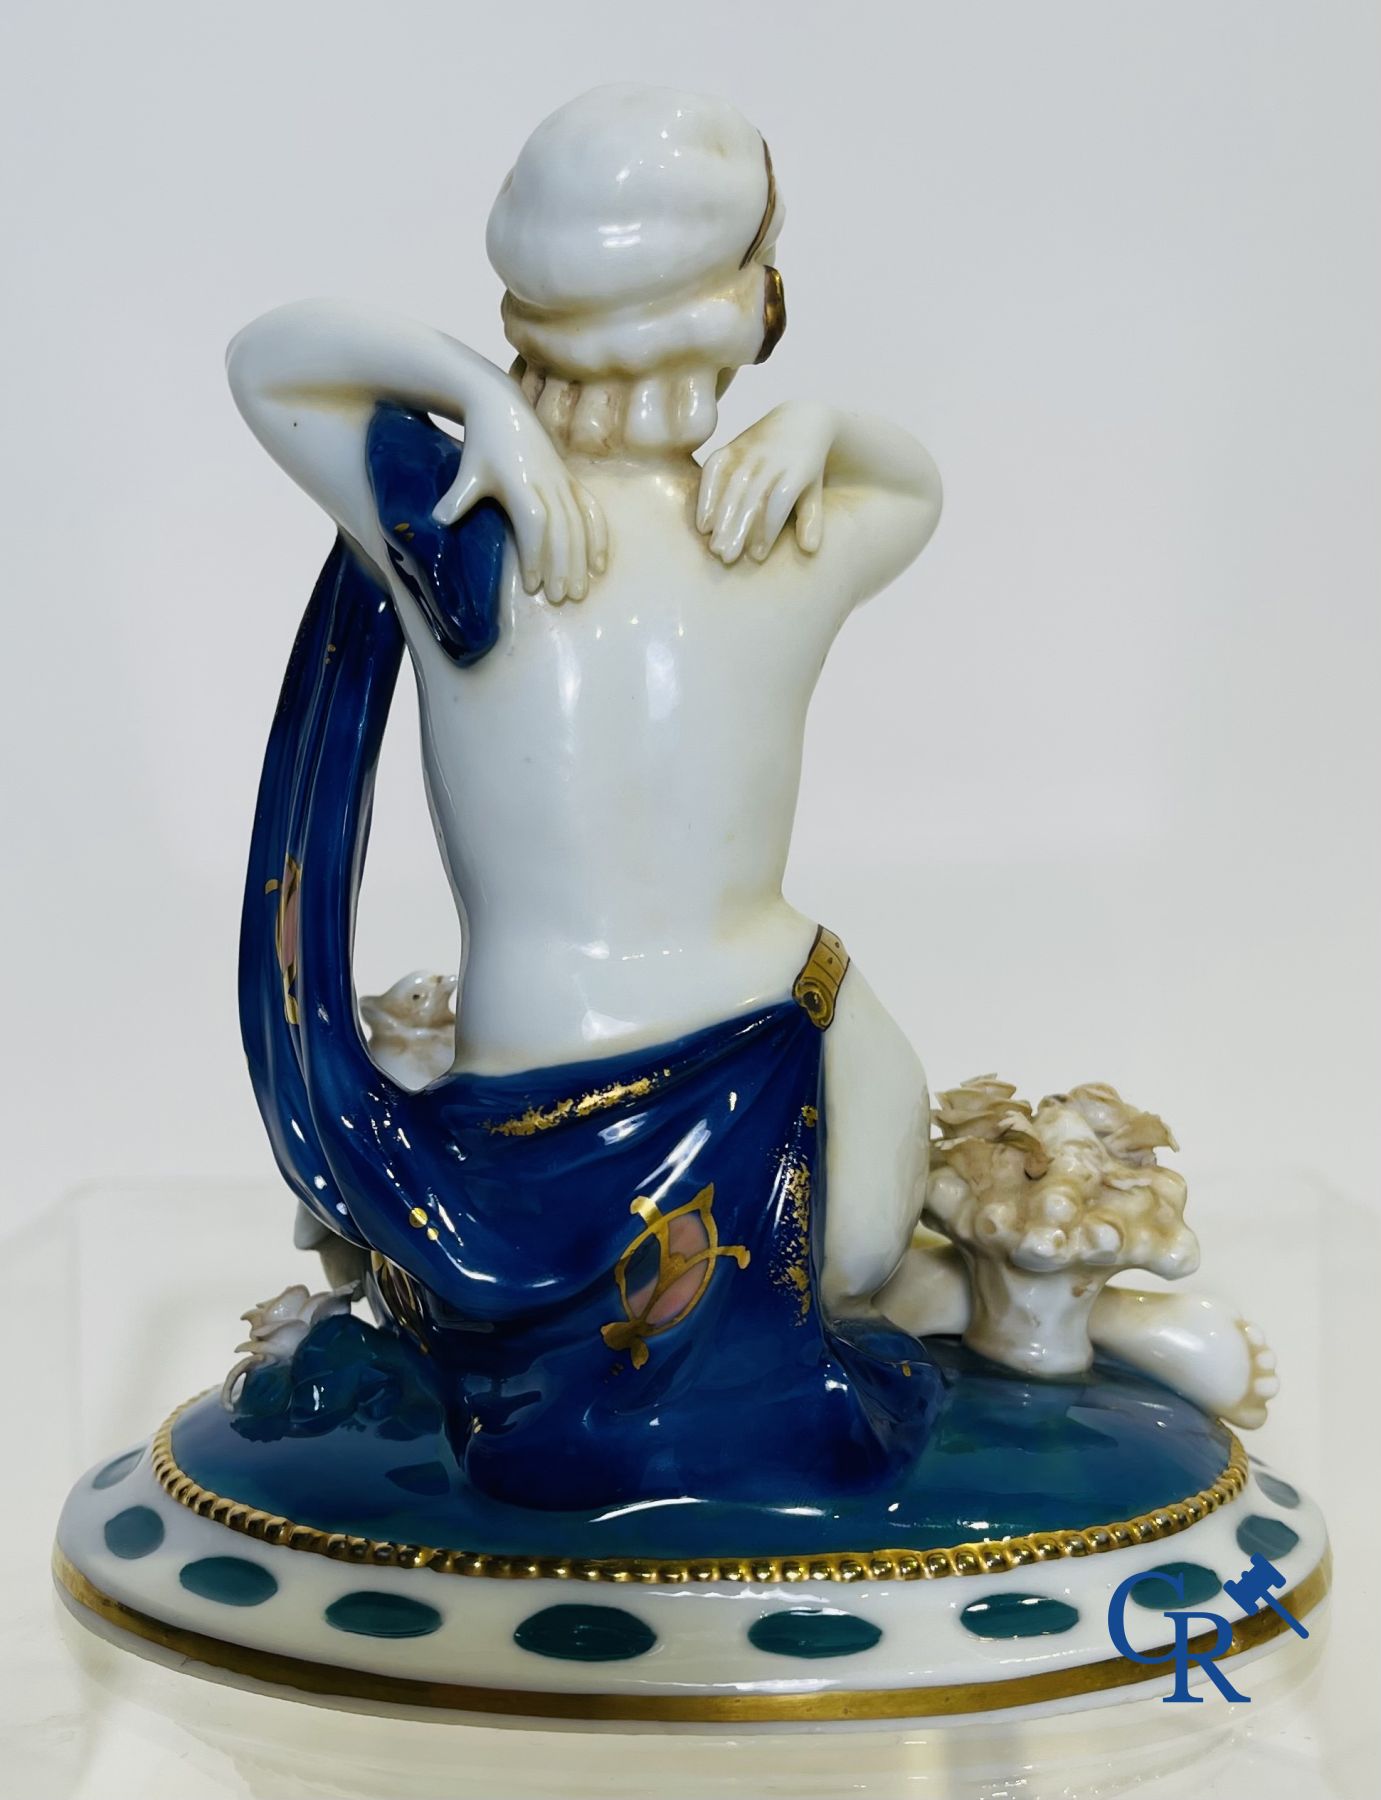 Art deco: An art deco sculpture in finely marked porcelain. - Image 4 of 9